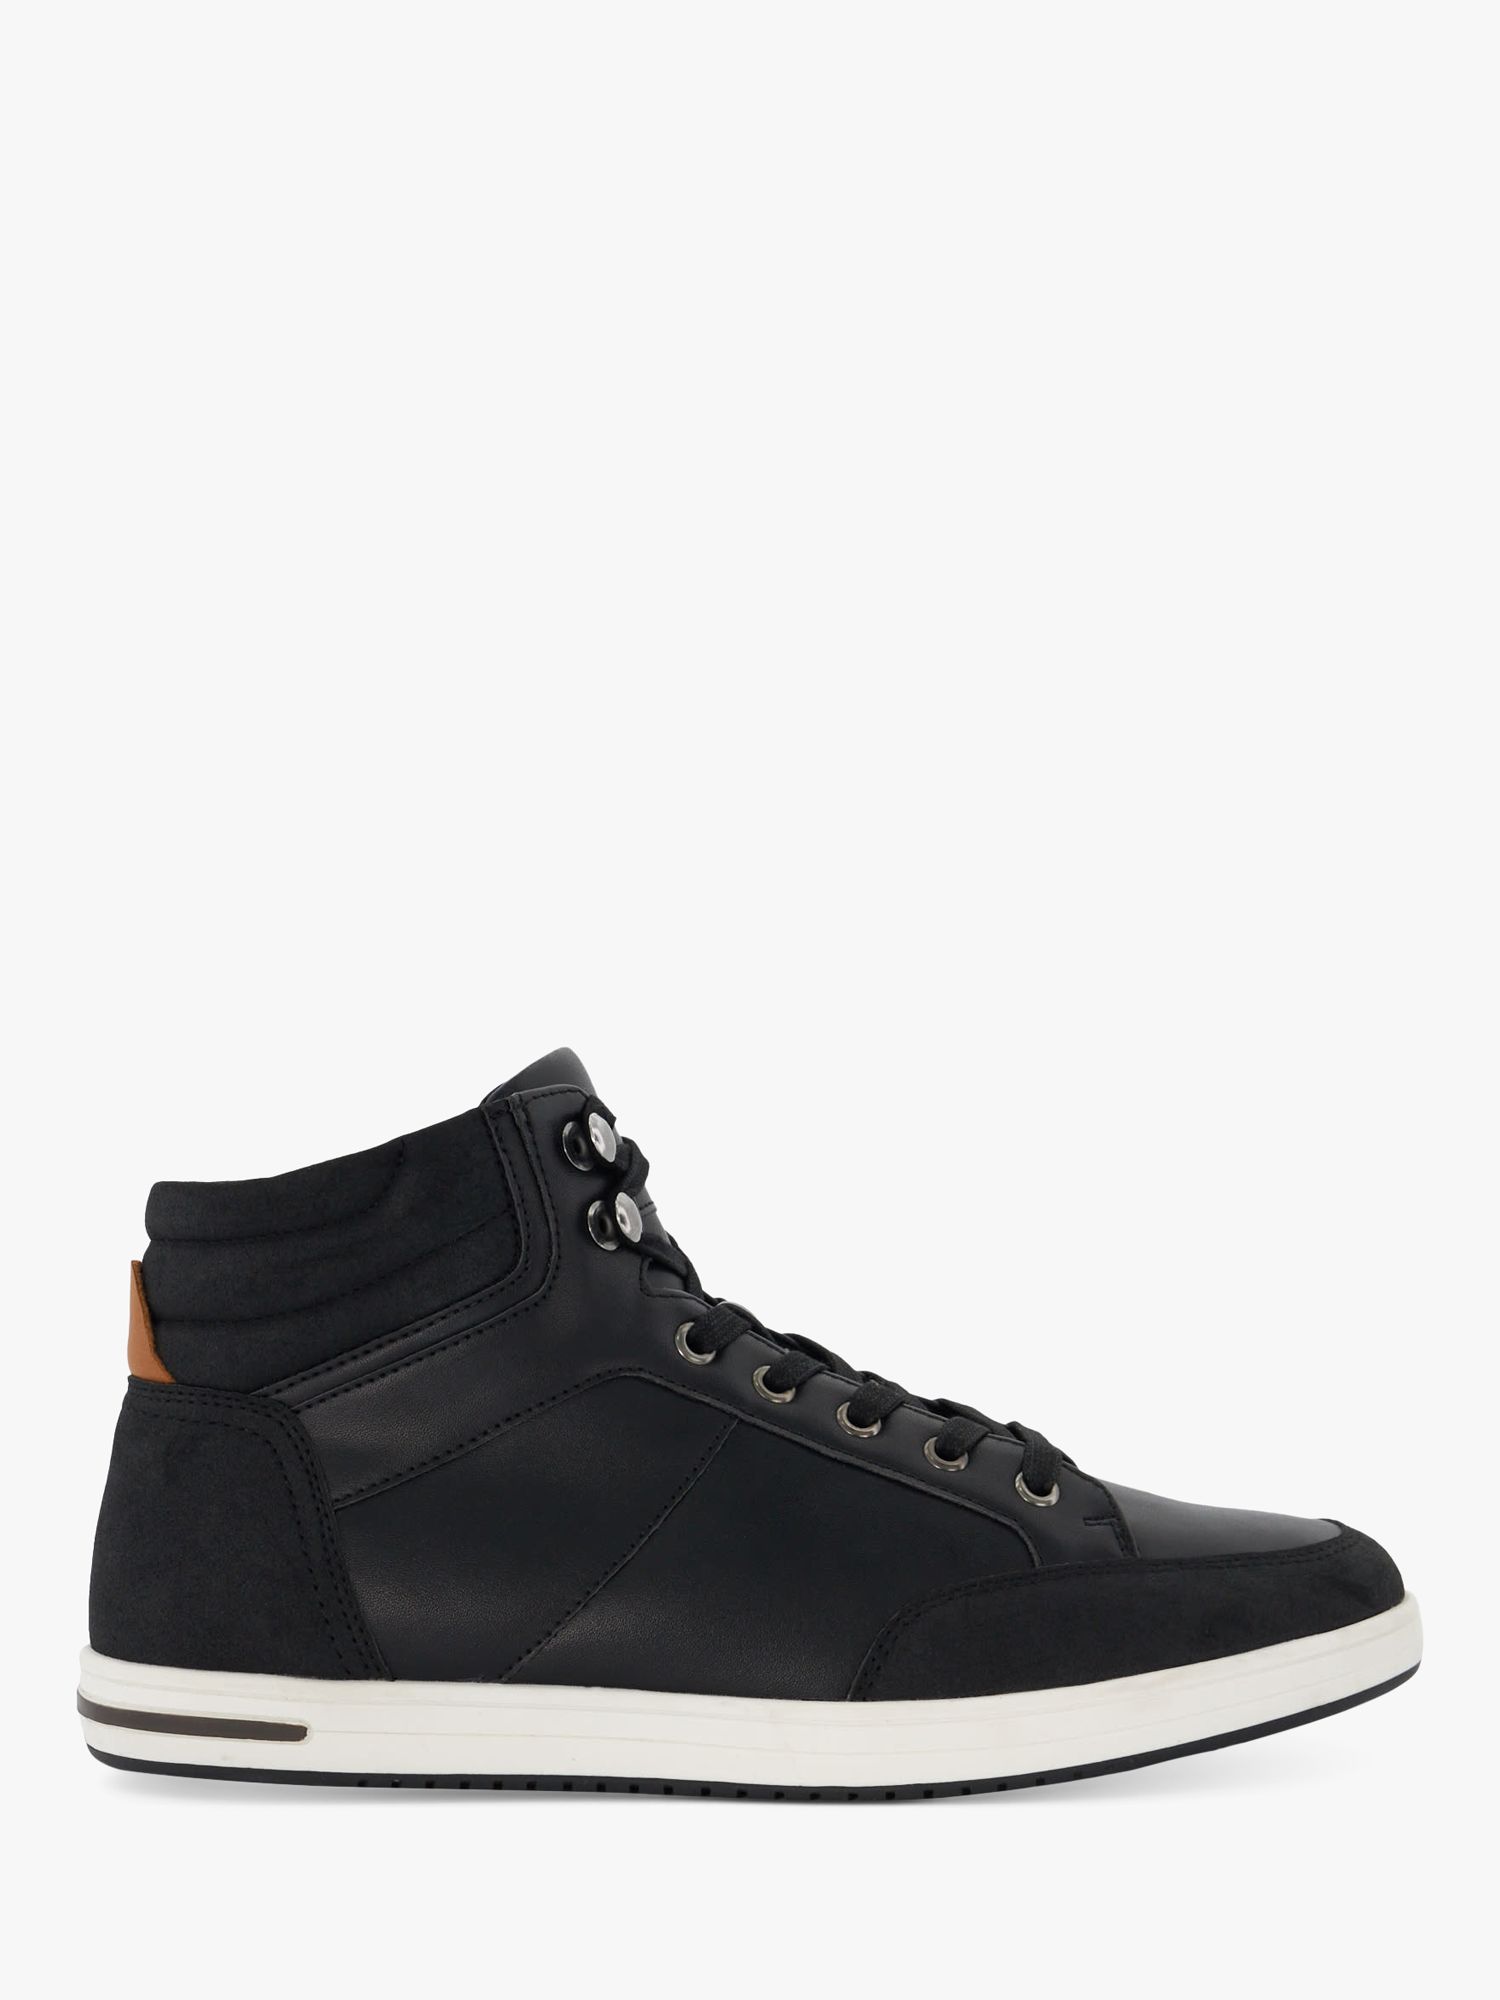 Dune Sutton Leather High-Top Trainers, Black, 6